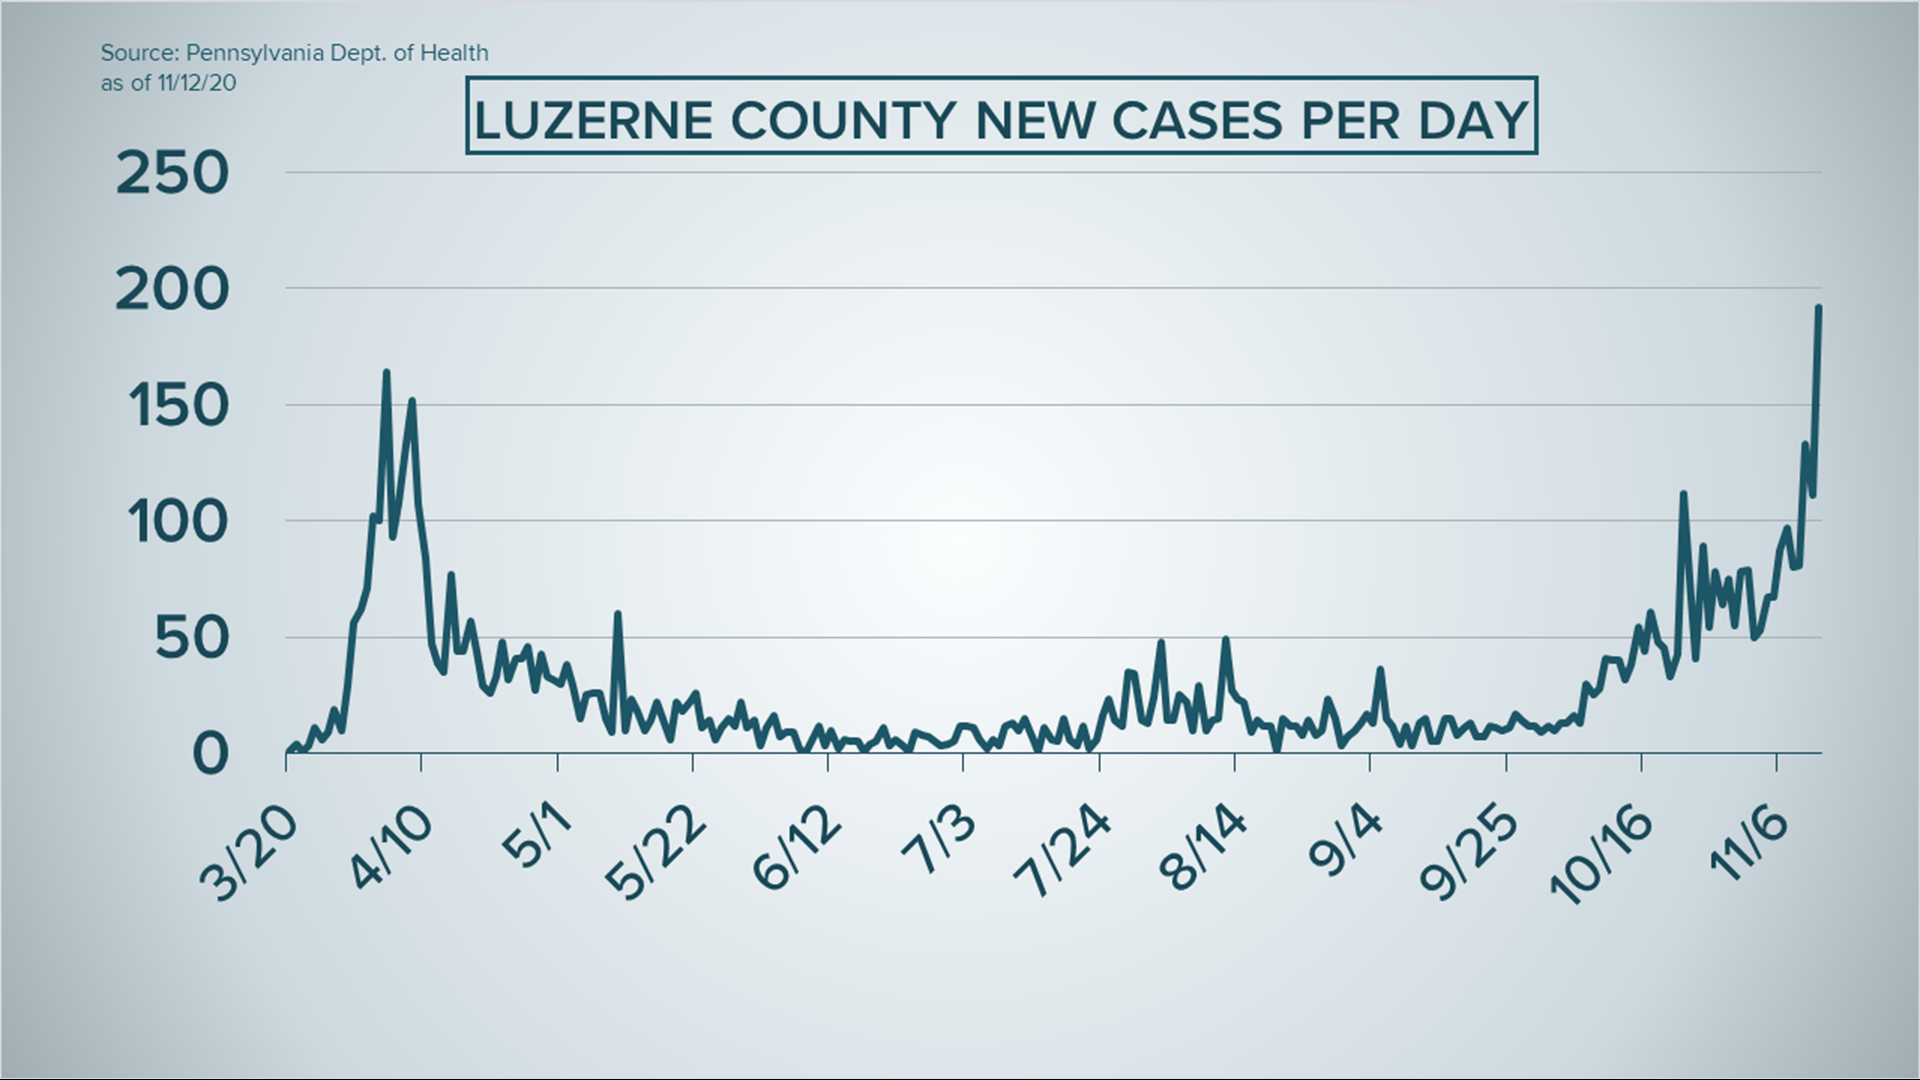 Luzerne County had 192 COVID-19 cases listed on Thursday, its highest number of cases yet.